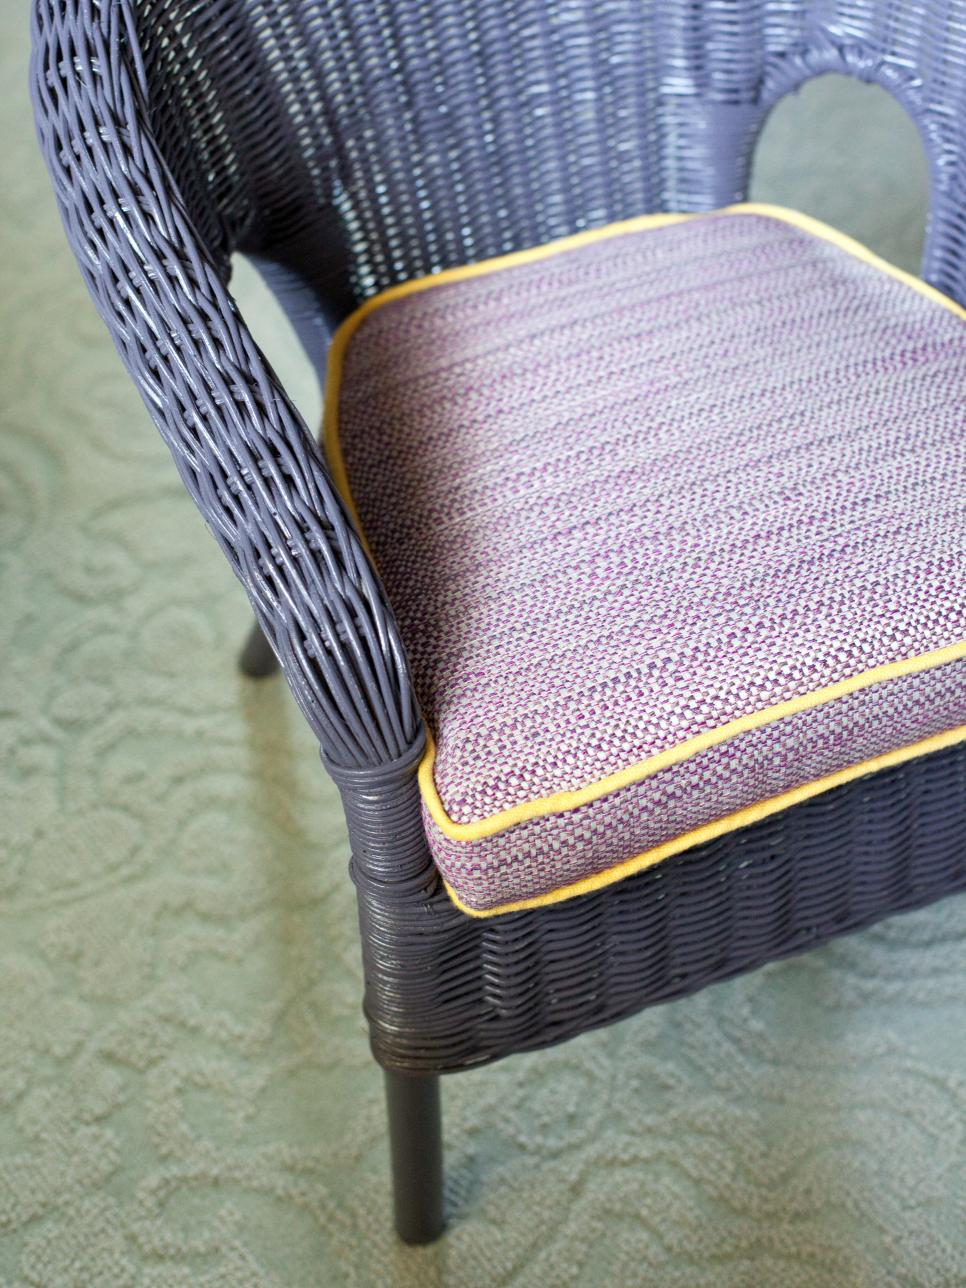 Close-up of a Violet Wicker Chair and Cushion 